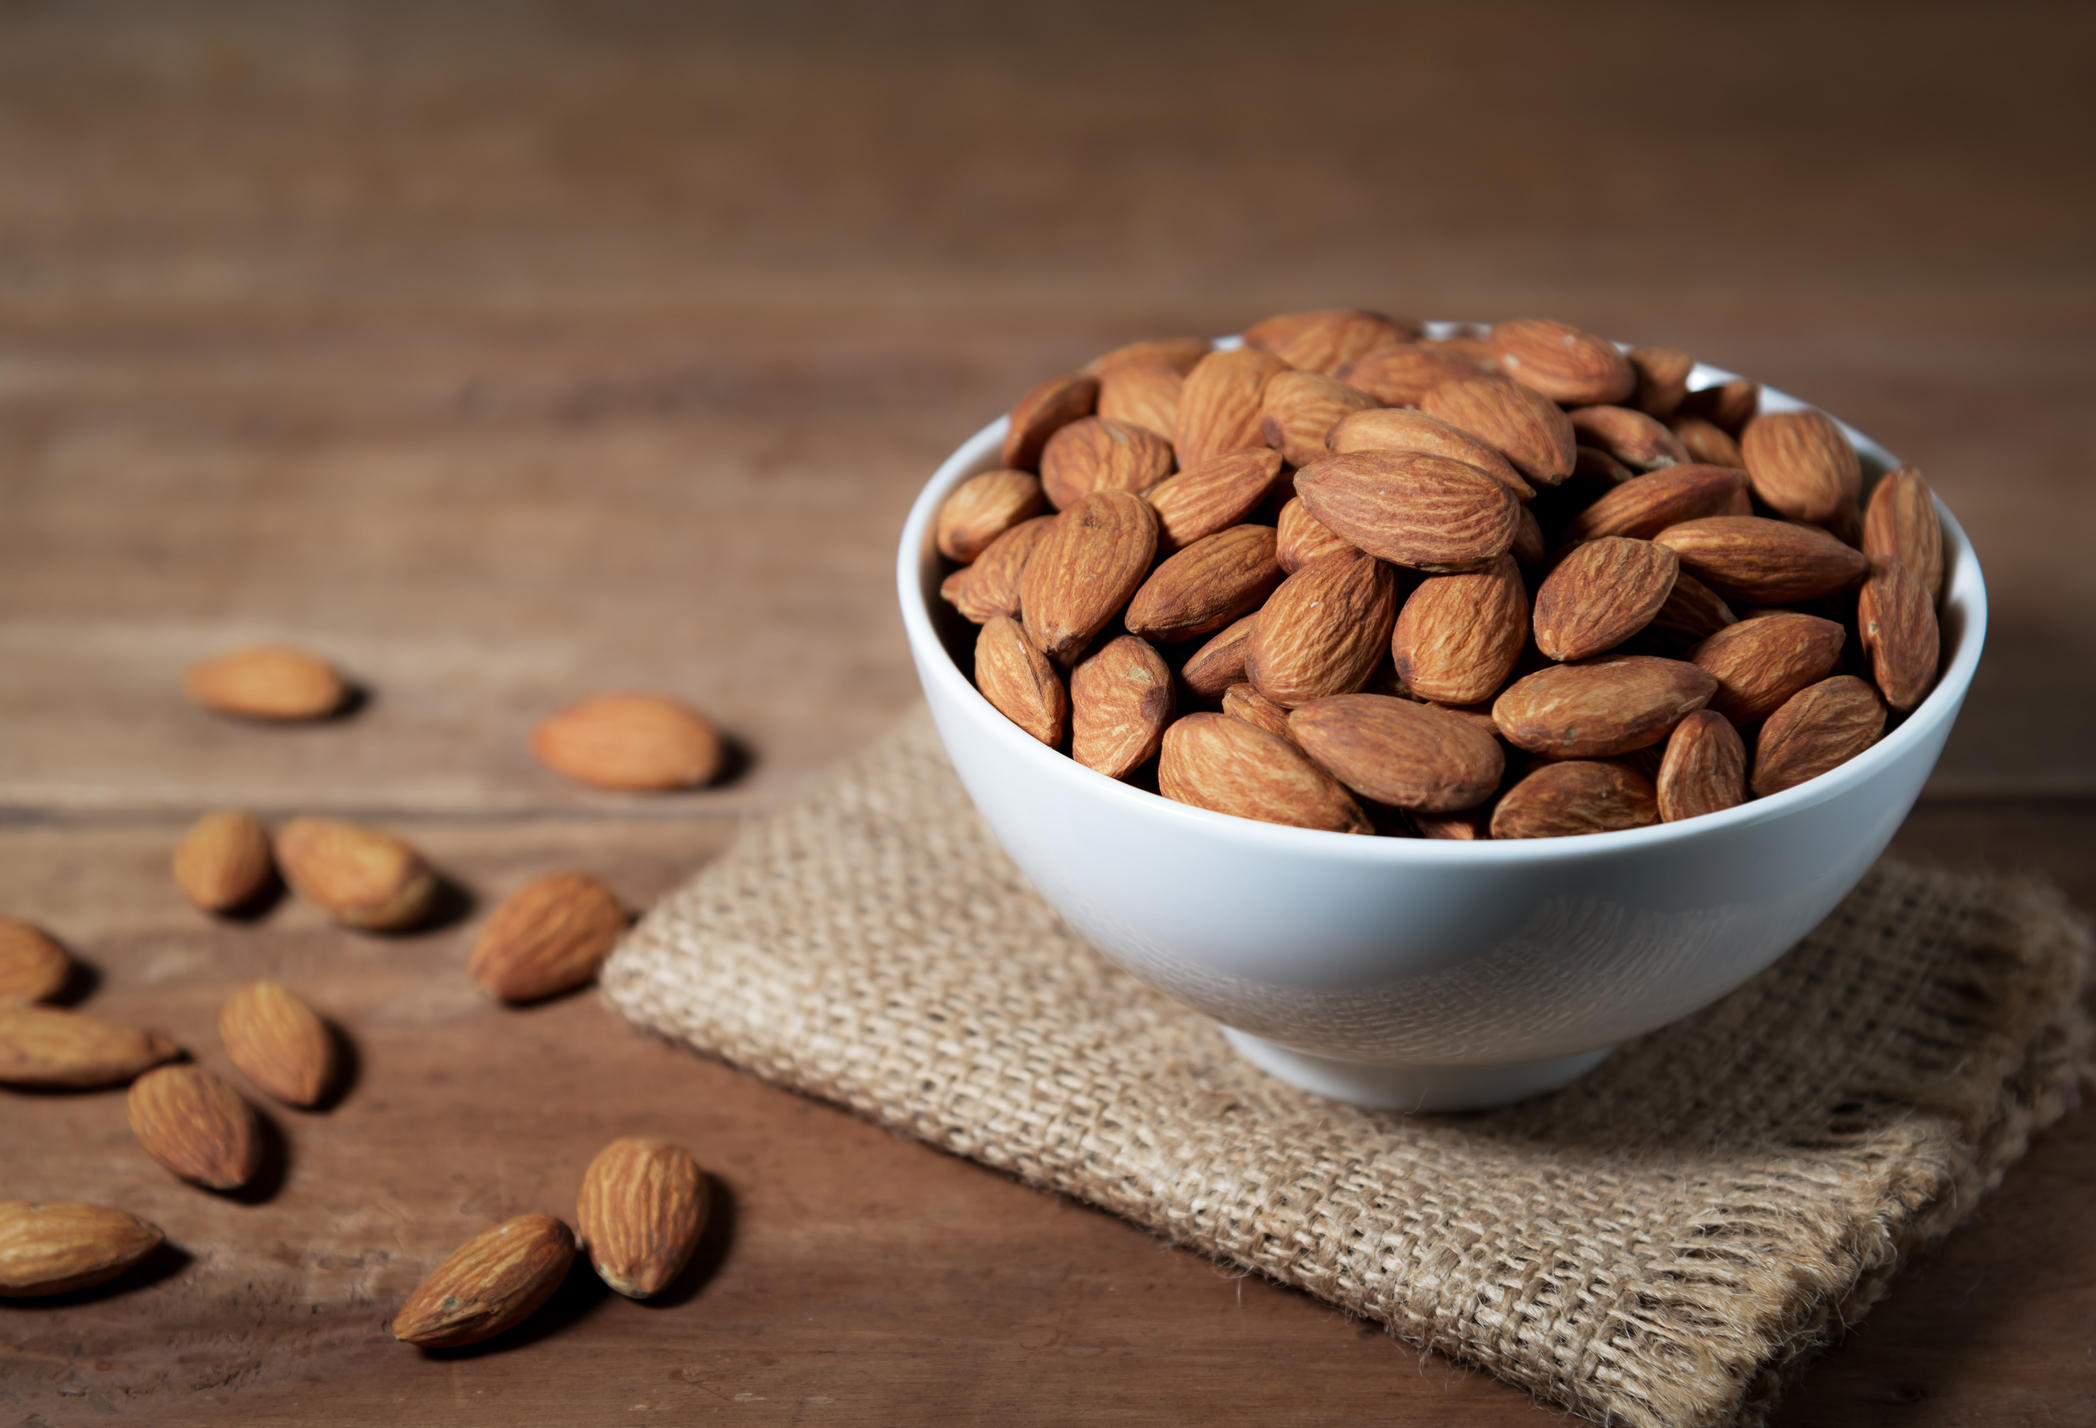 Almonds: A Good Snack For Your Smile!